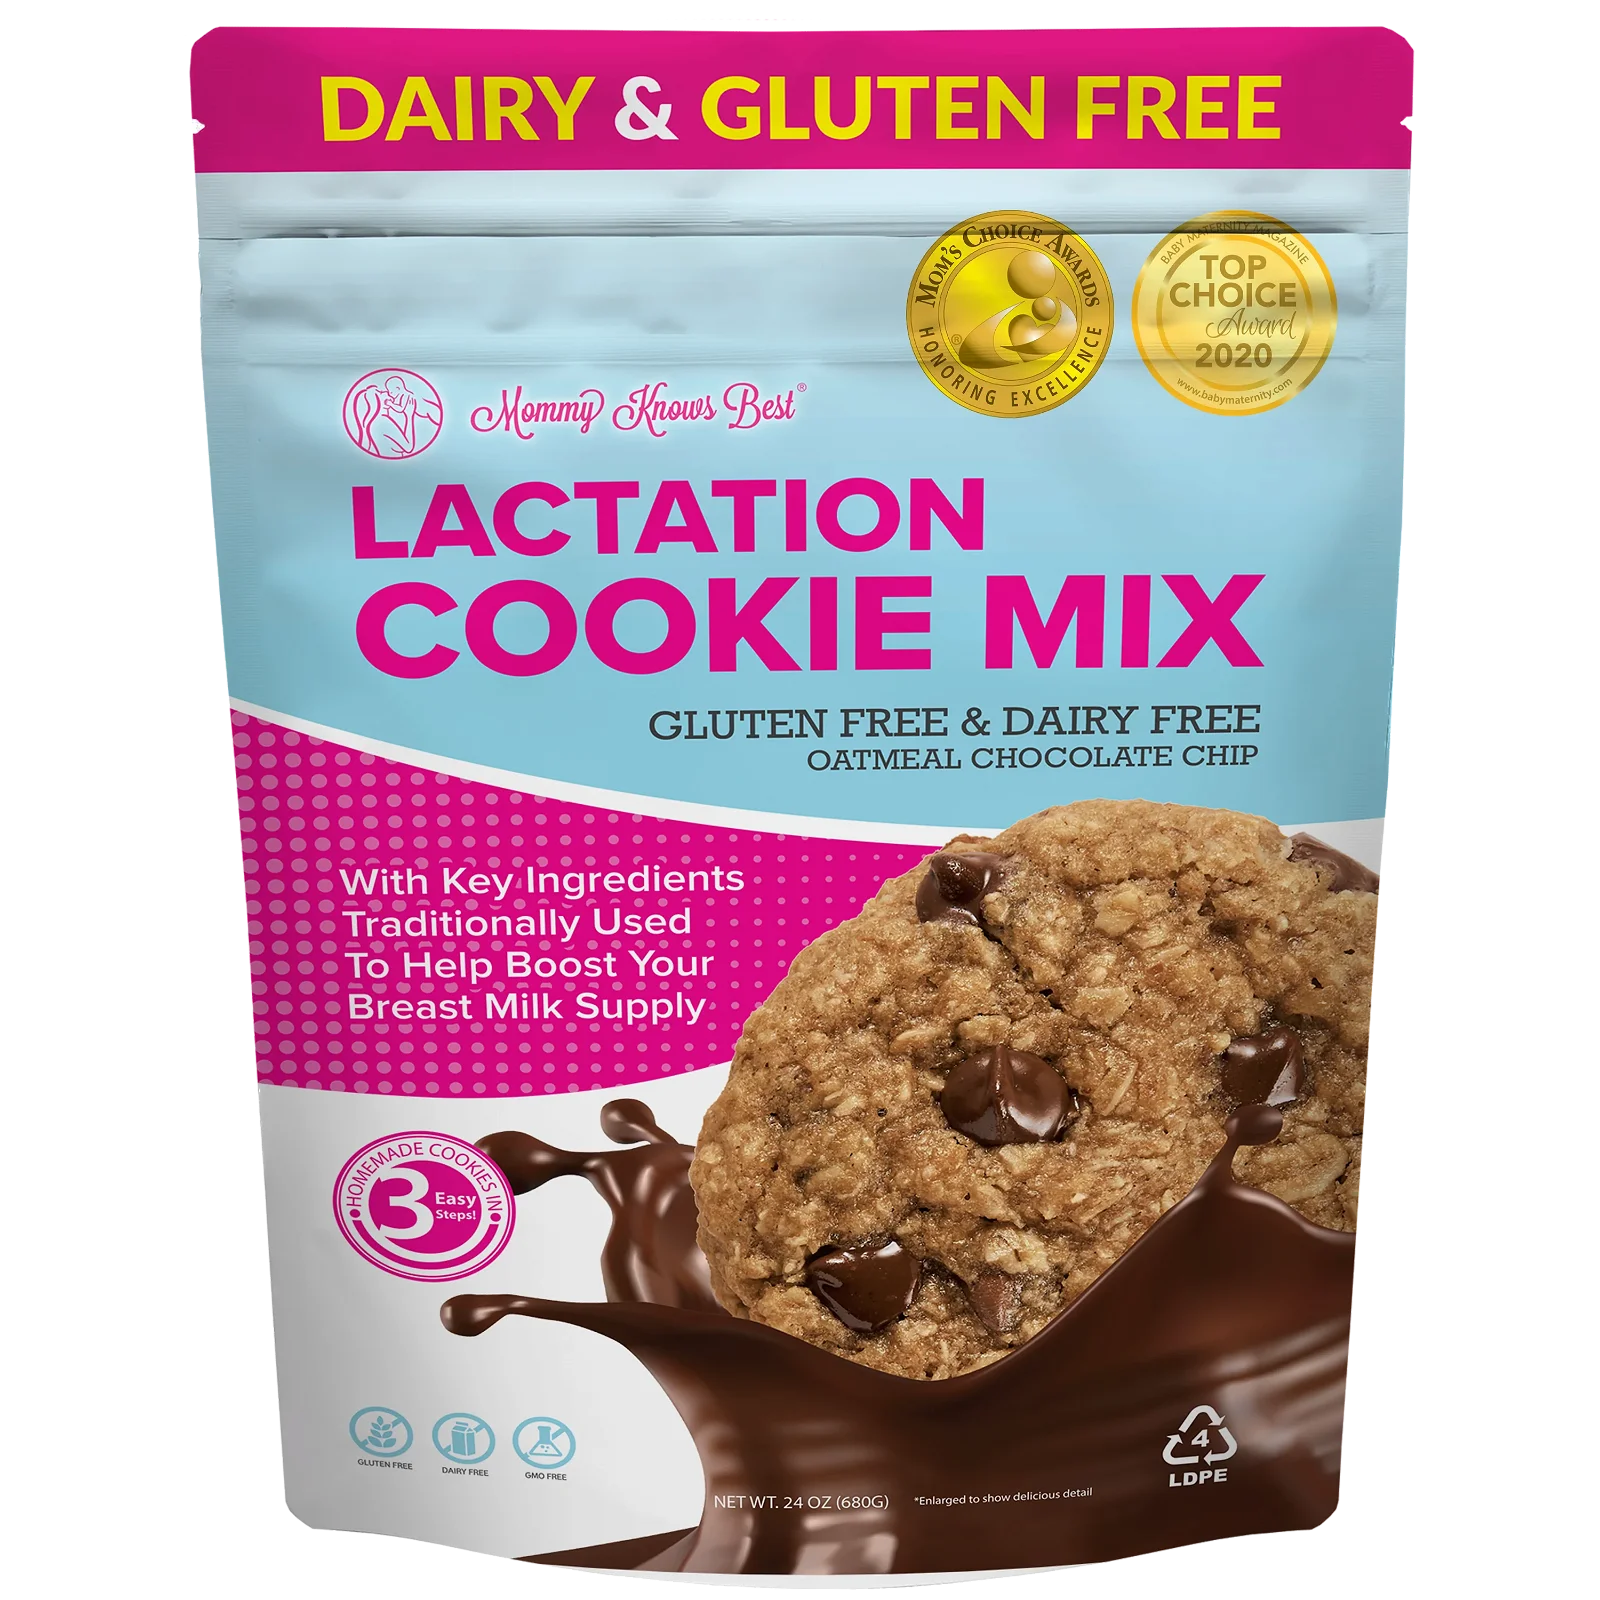 Image of Gluten/Dairy Free Lactation Cookie Mix